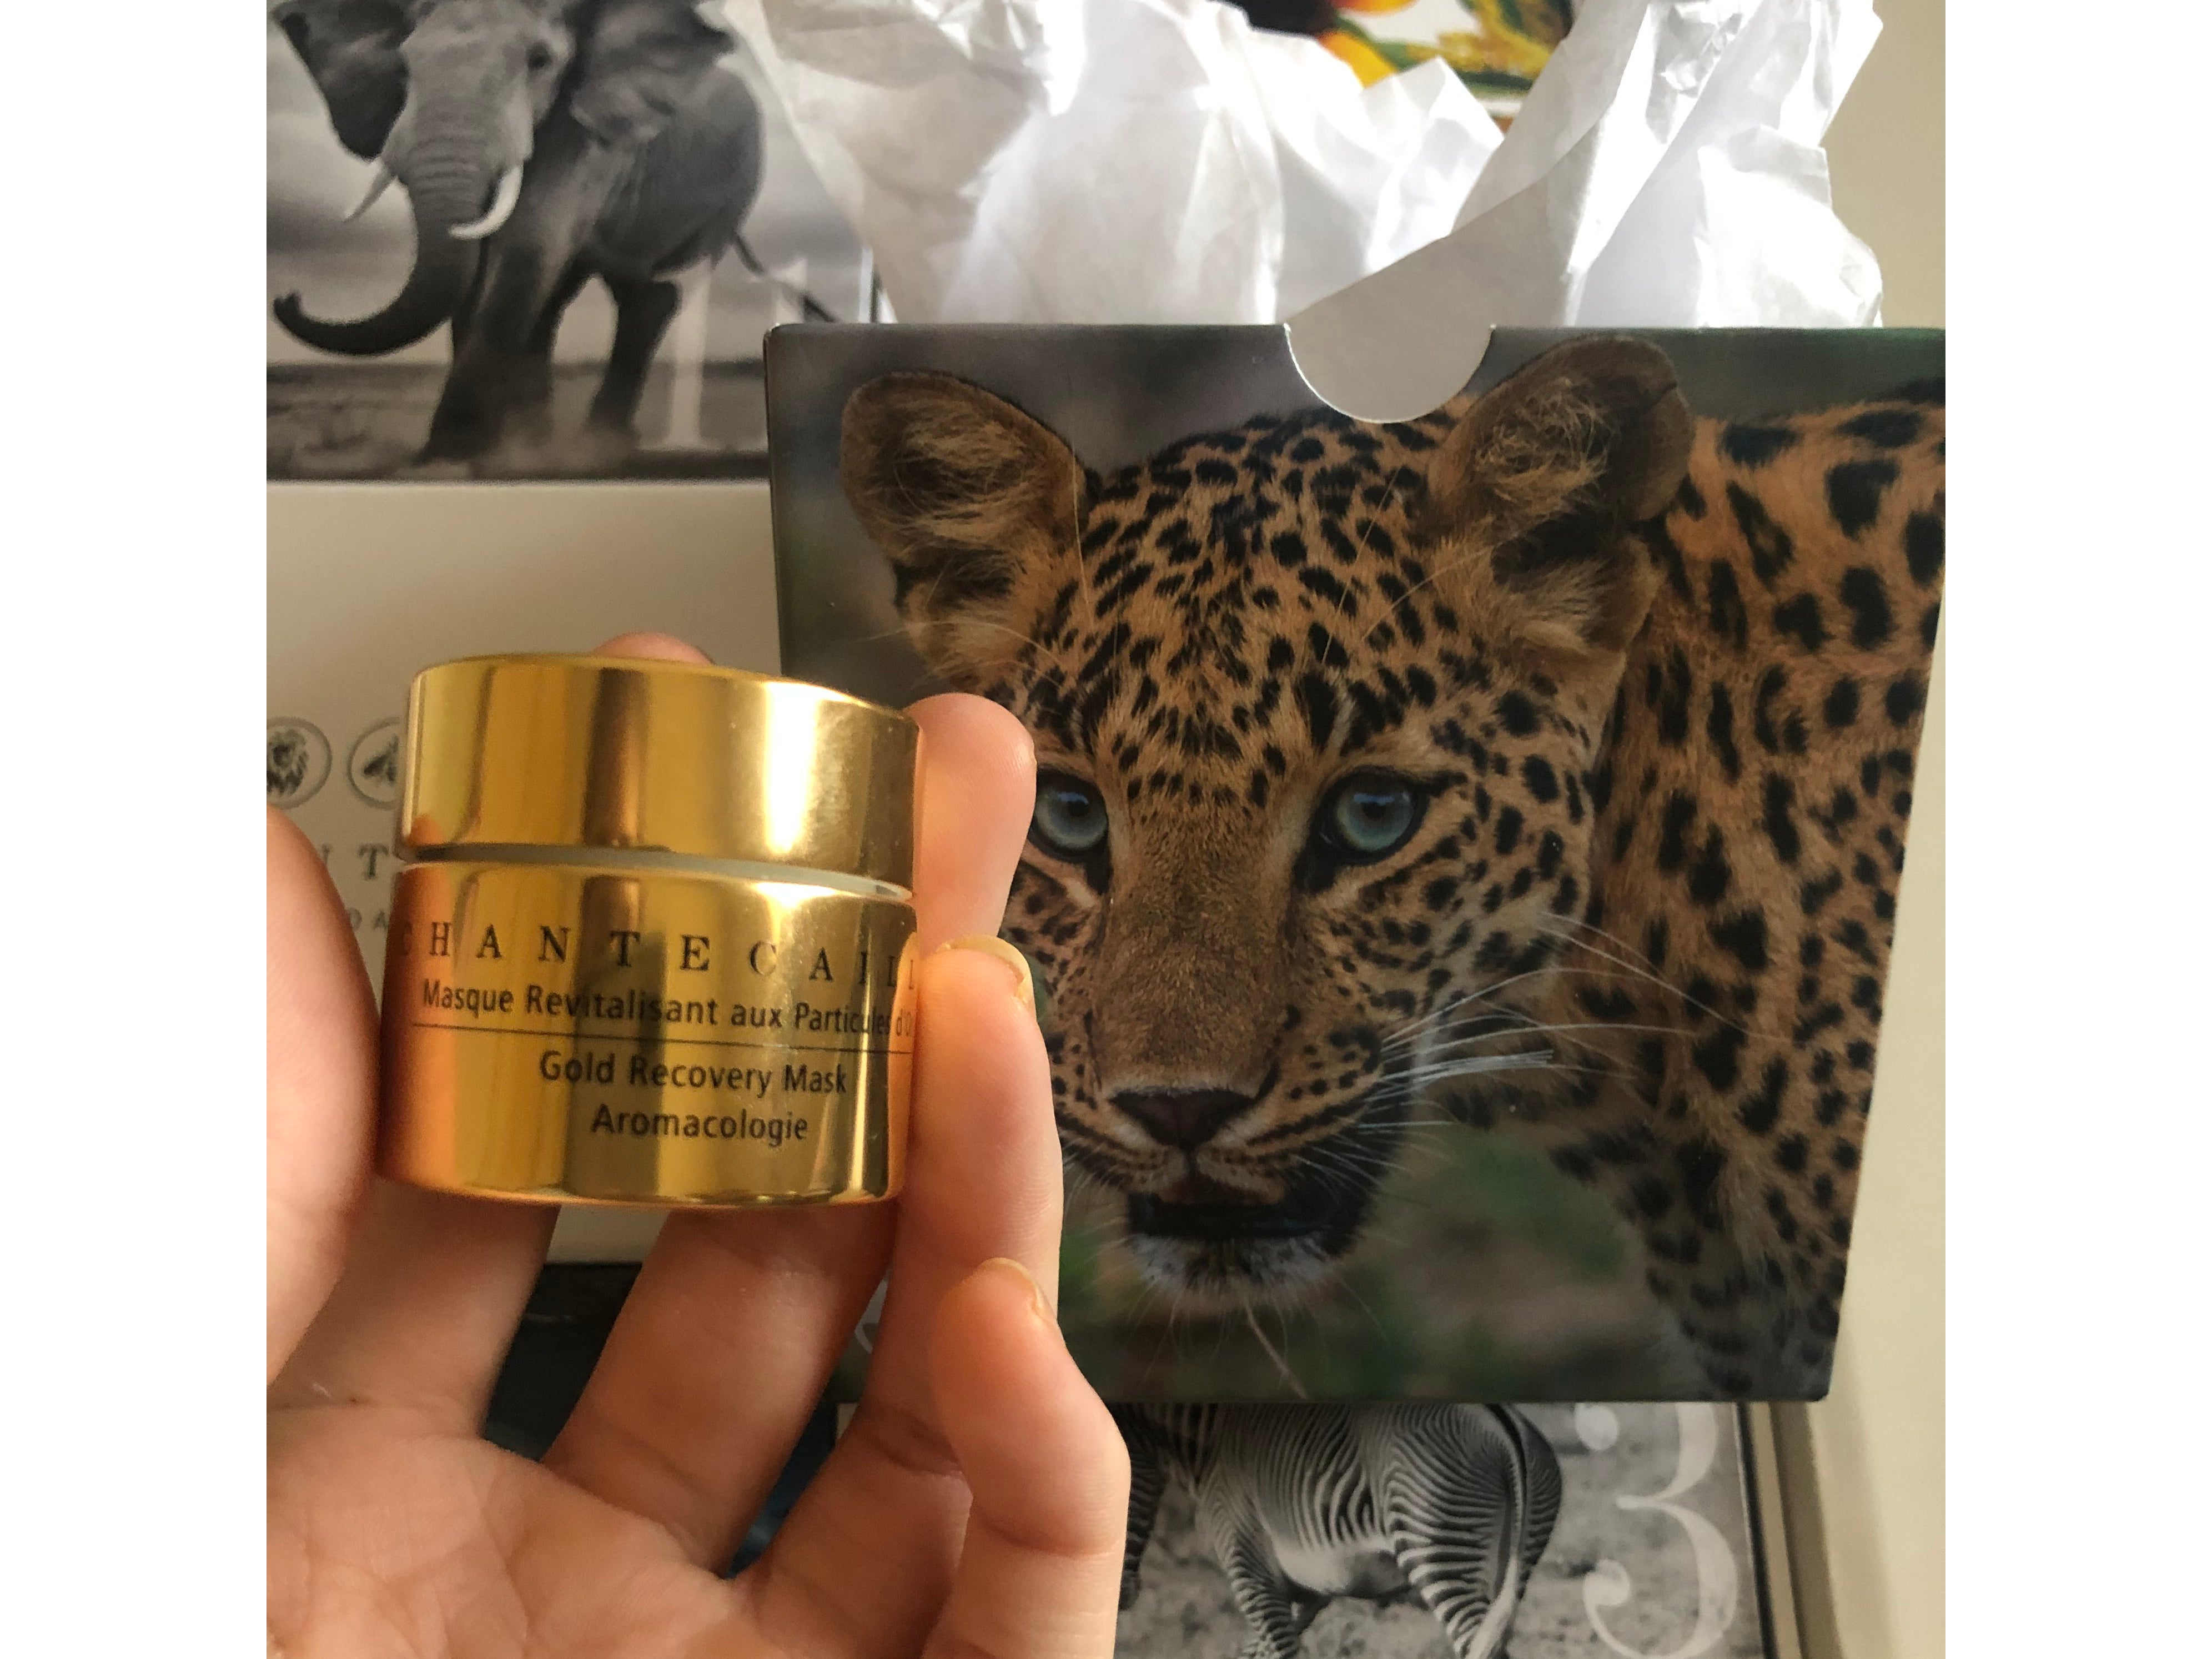 We left this gold-infused mask on overnight for the best results